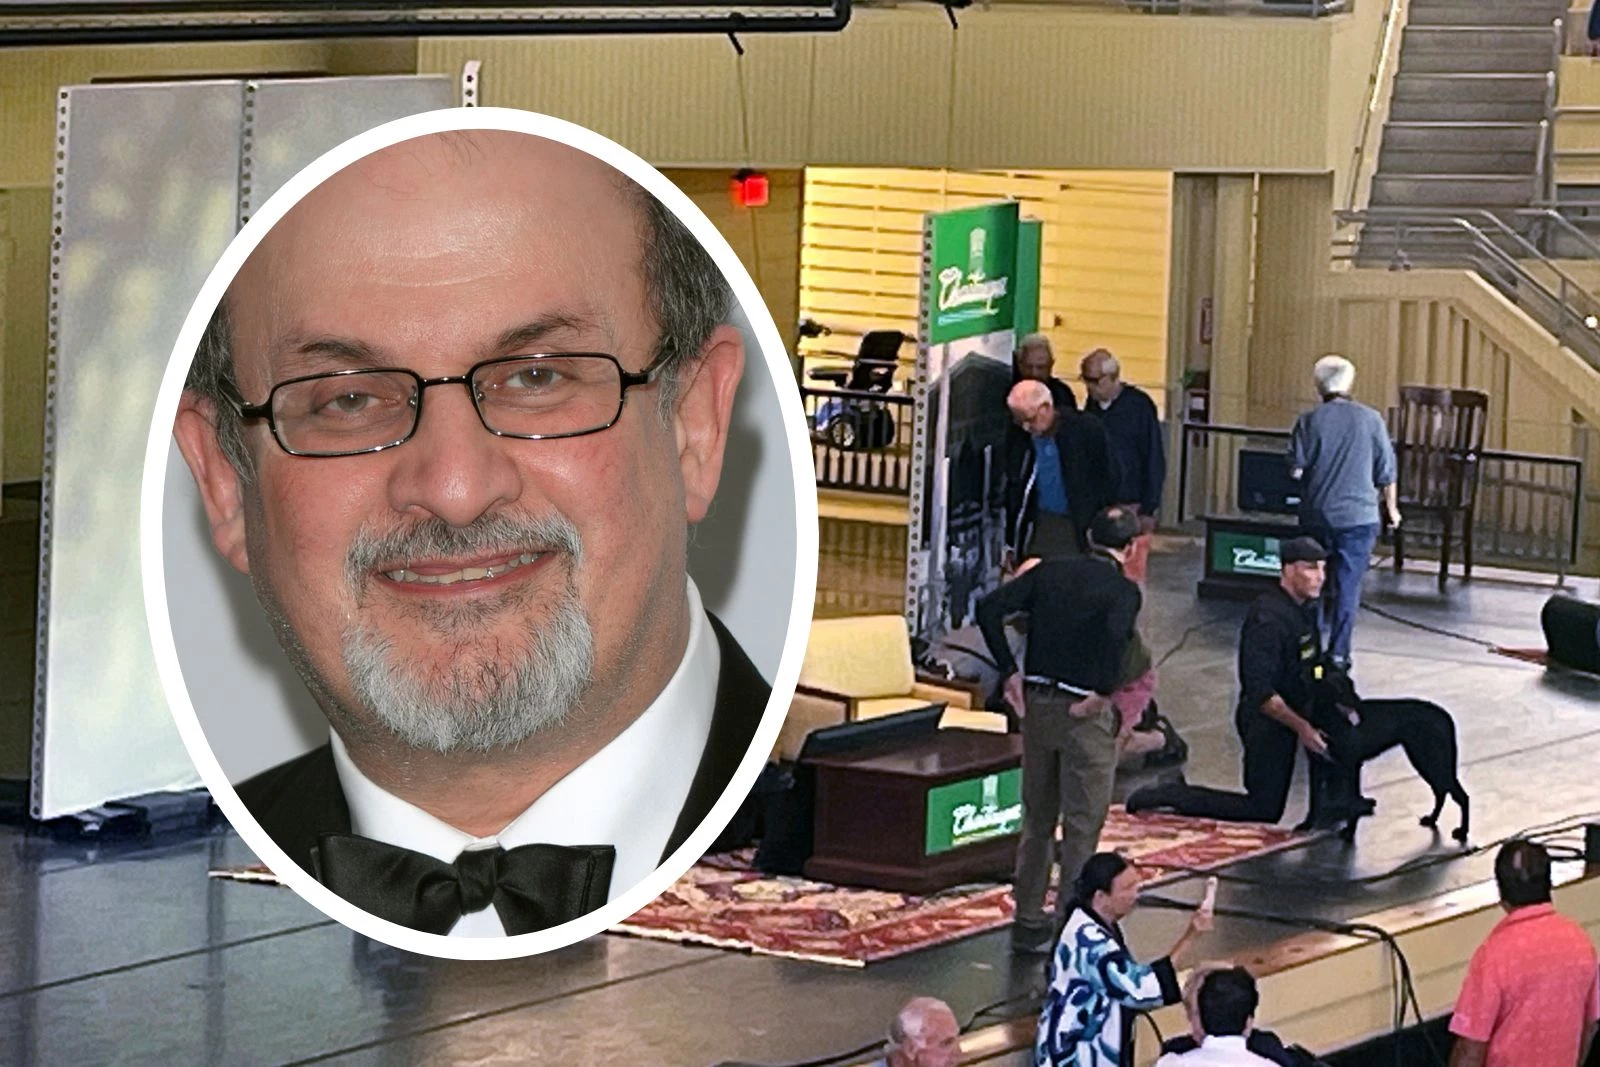 NJ man charged with stabbing author Salman Rushdie before lecture